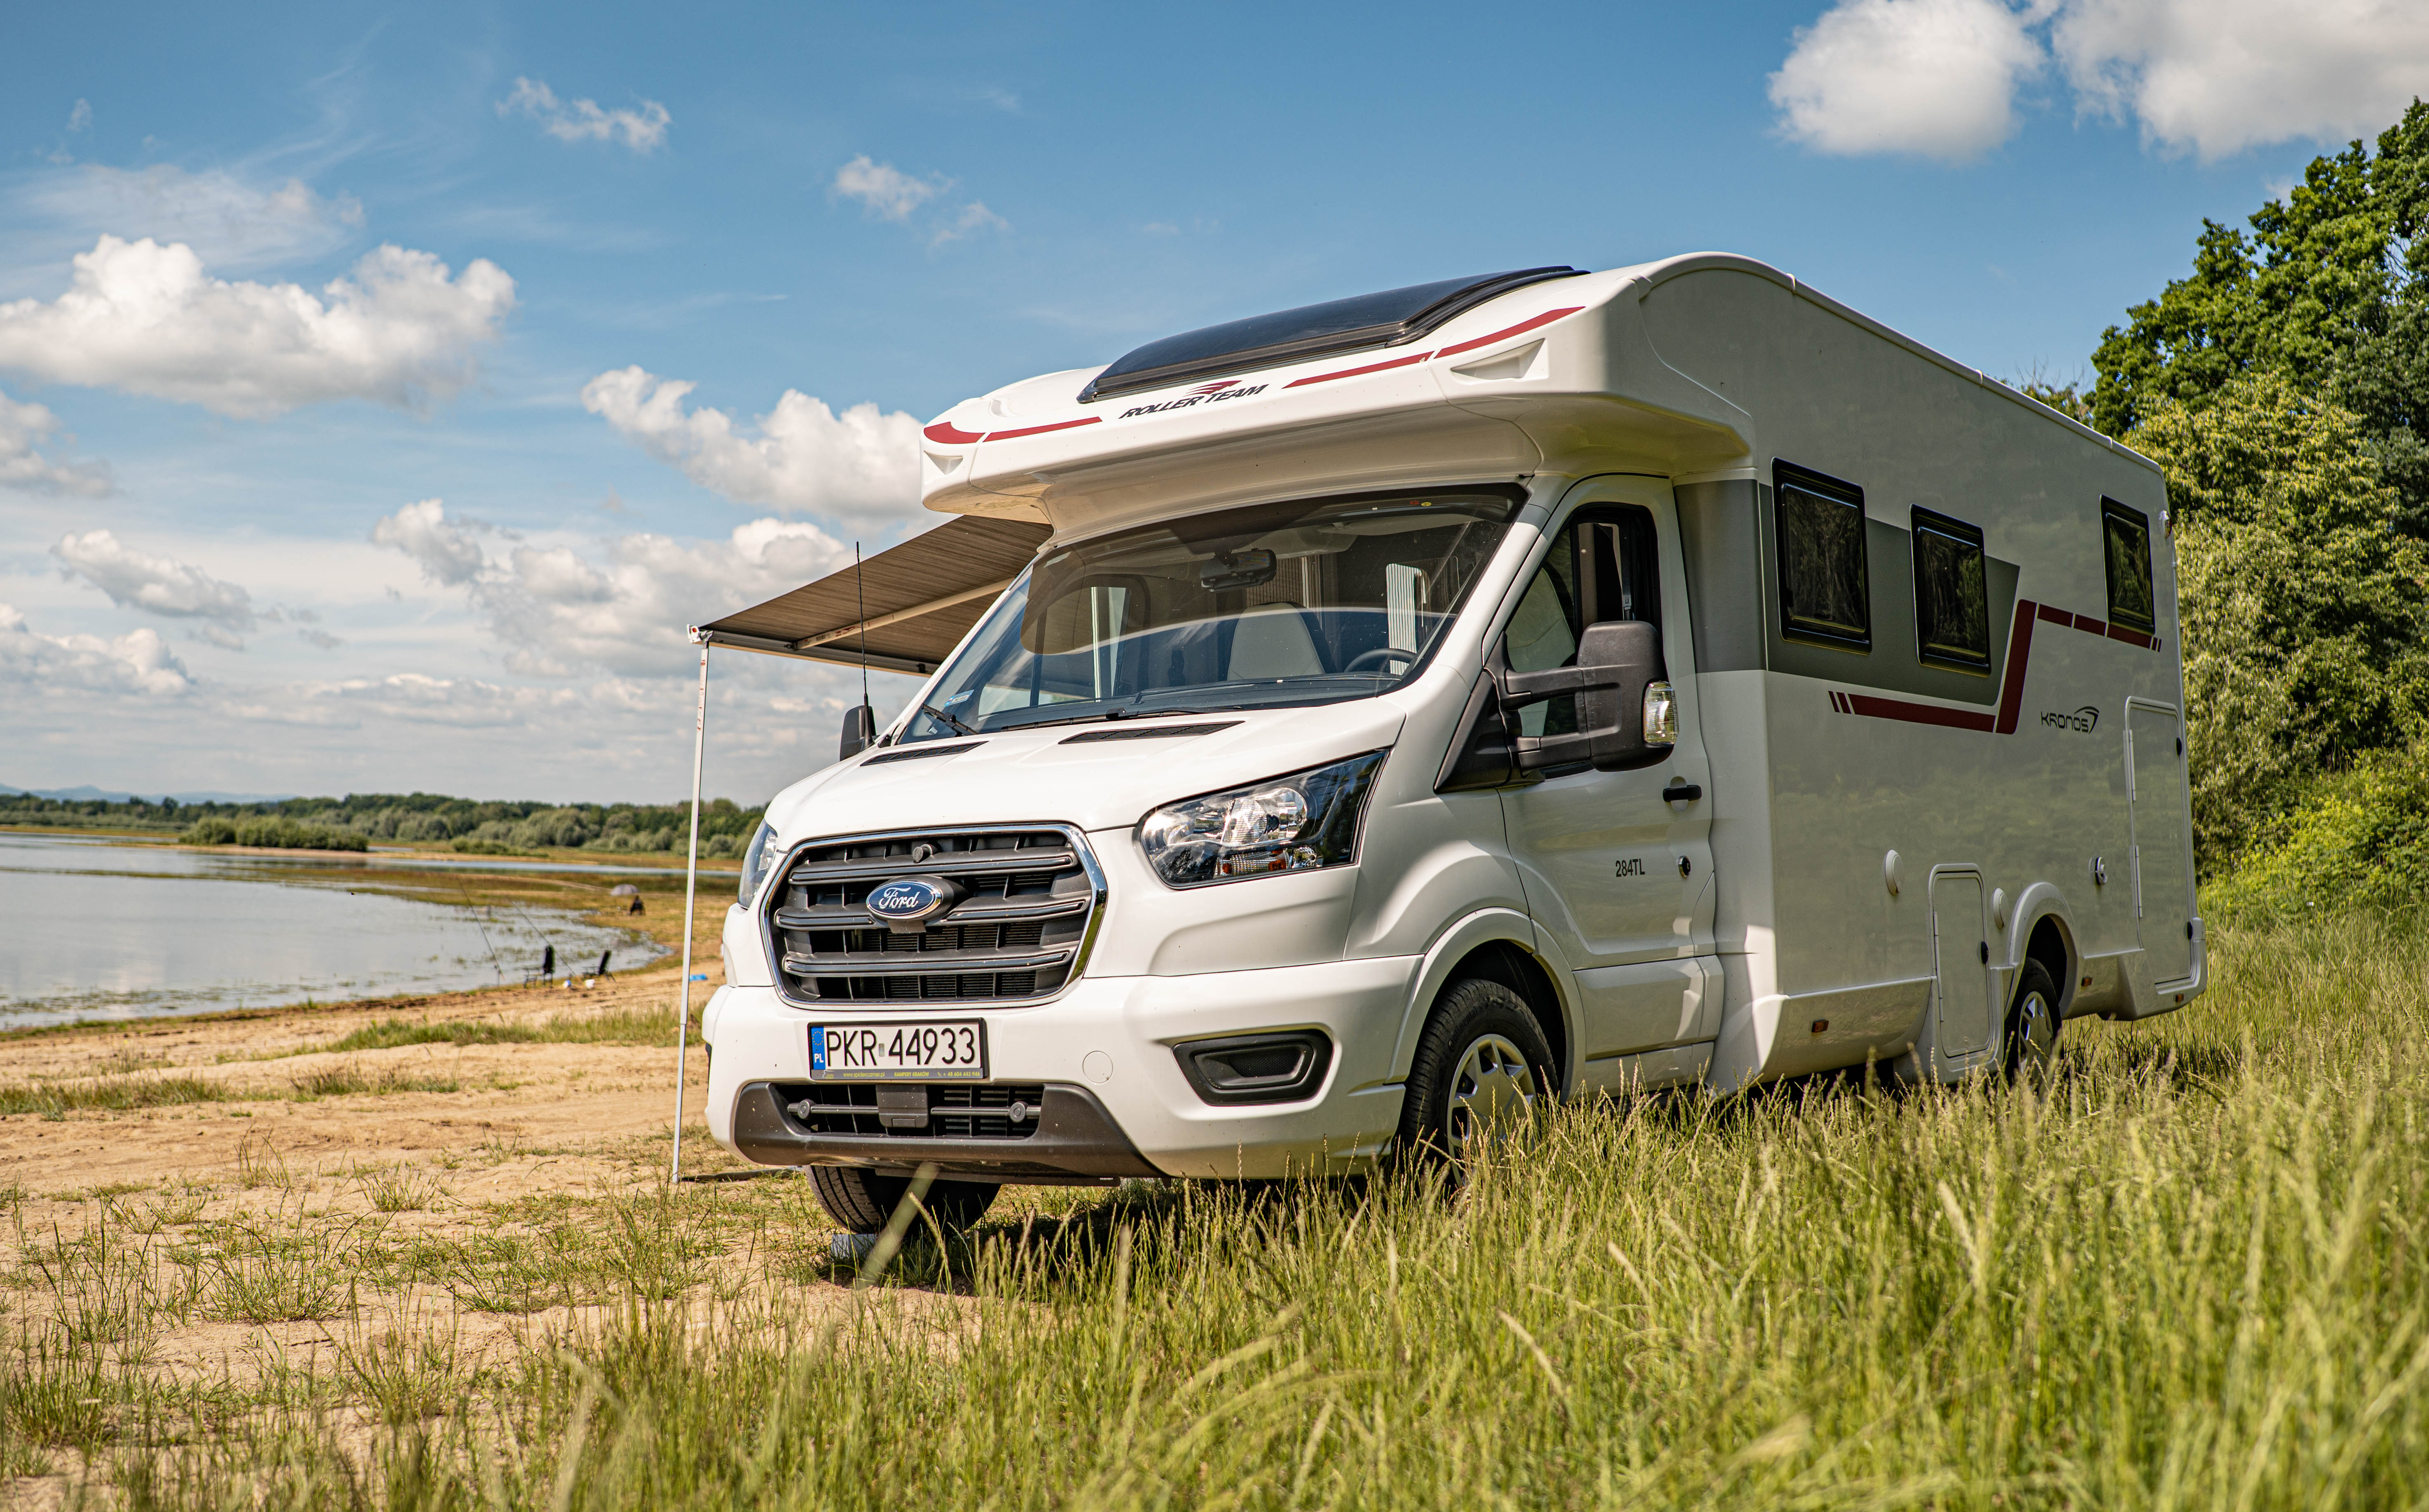 Company The Campers offer – rental – image 1